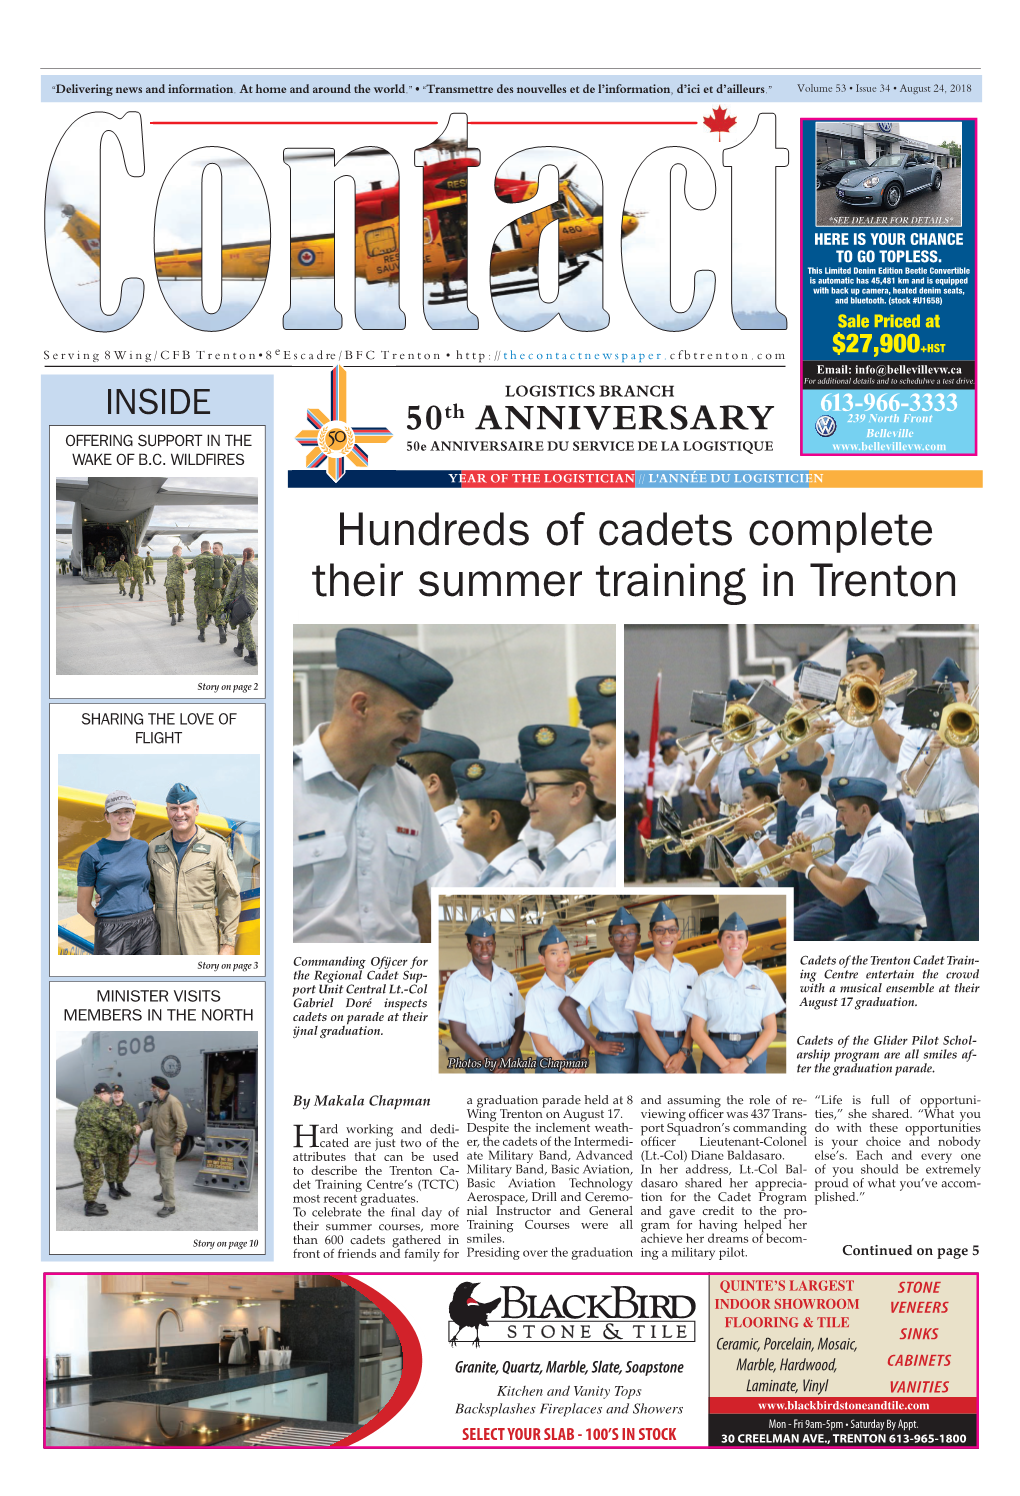 Hundreds of Cadets Complete Their Summer Training in Trenton